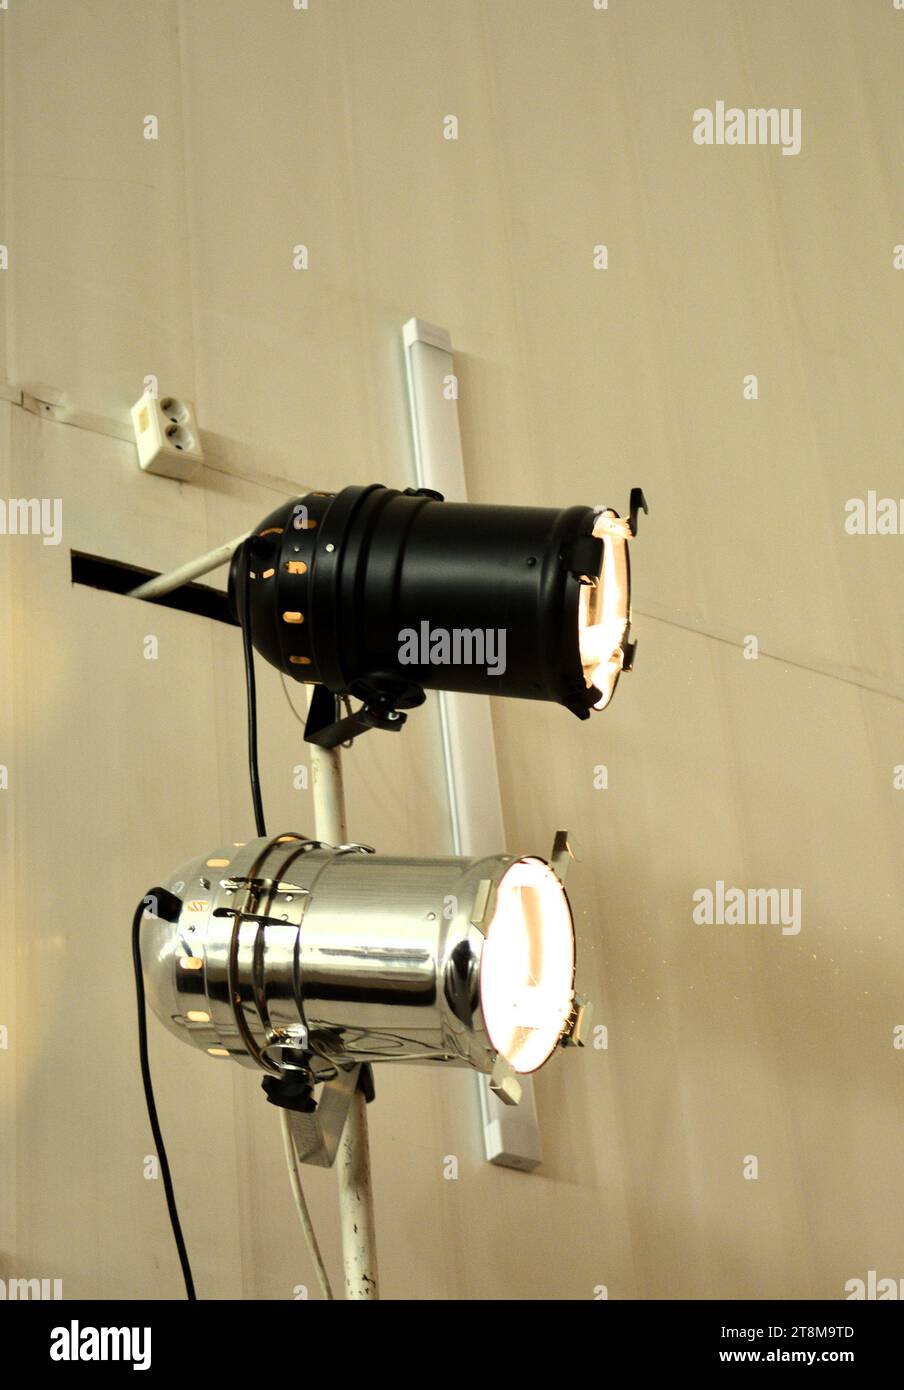 Two turned on theater spotlights on a white wall with wires and an electrical outlet. Close-up. Stock Photo